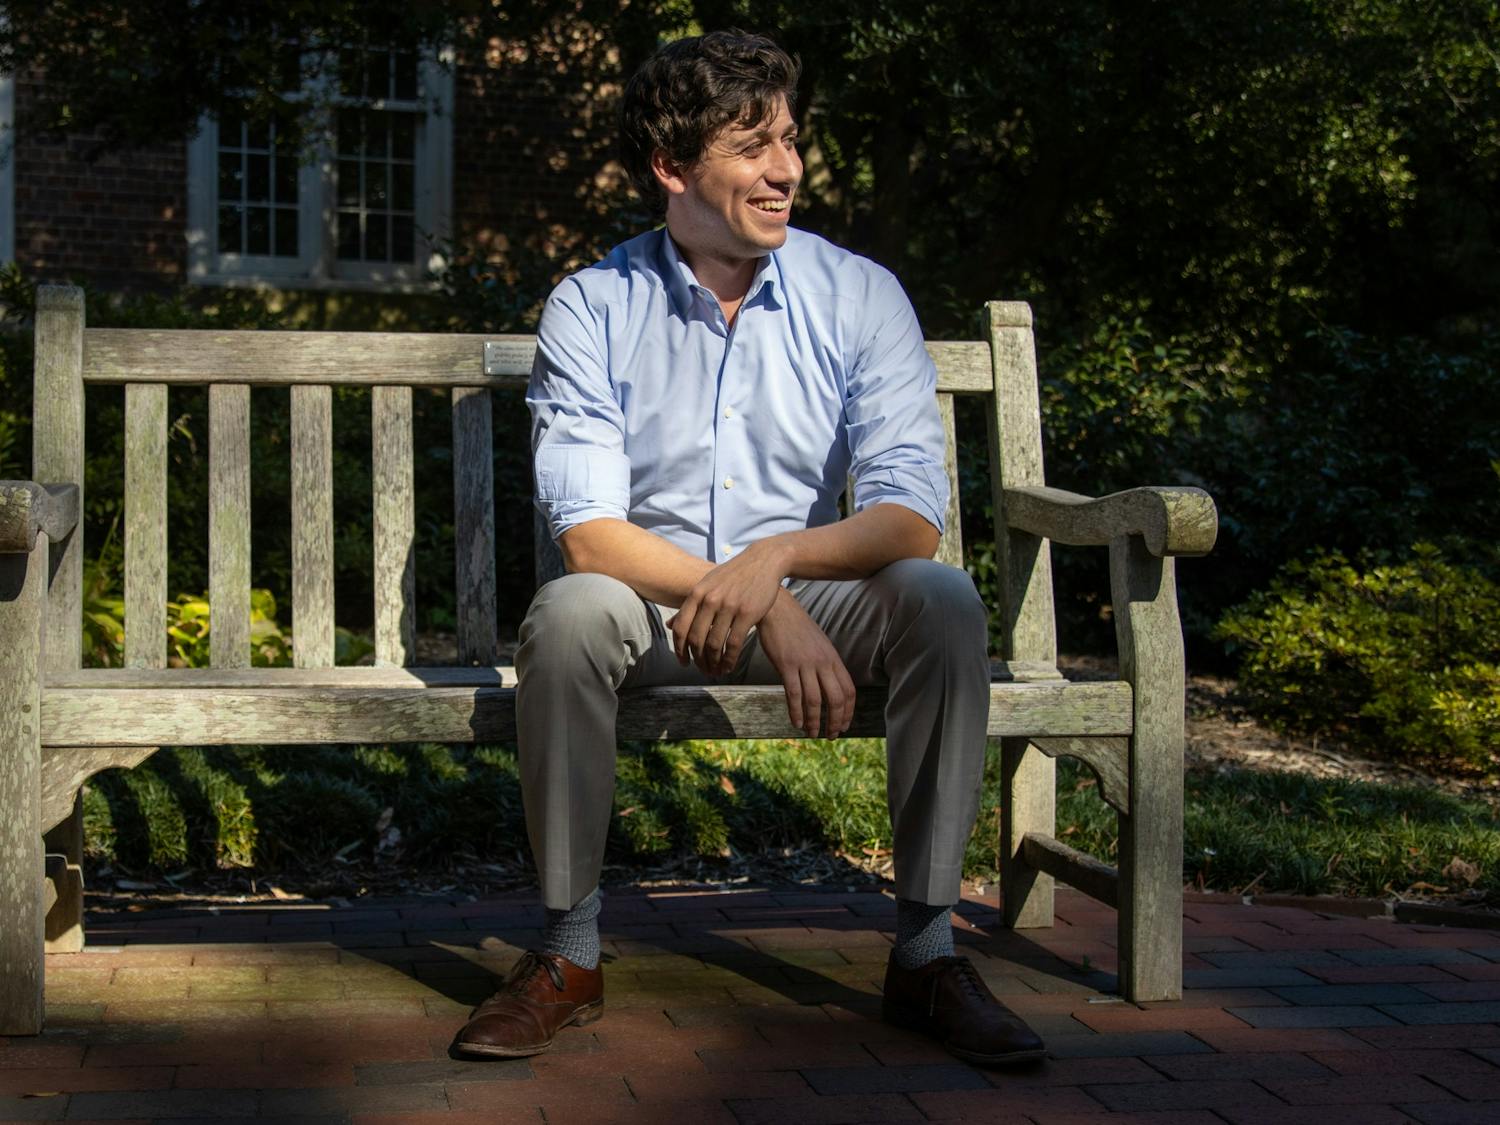 Jonah Garson is running for the N.C. House seat that will be open after Rep. Verla Insko retires at the end of her term in December 2022. Garson poses for a portrait Monday in the Wellstone Memorial Garden on UNC's campus, named for political organizers that Garson said he looks up to. "They were rockstars for left labor policies," Garson said.